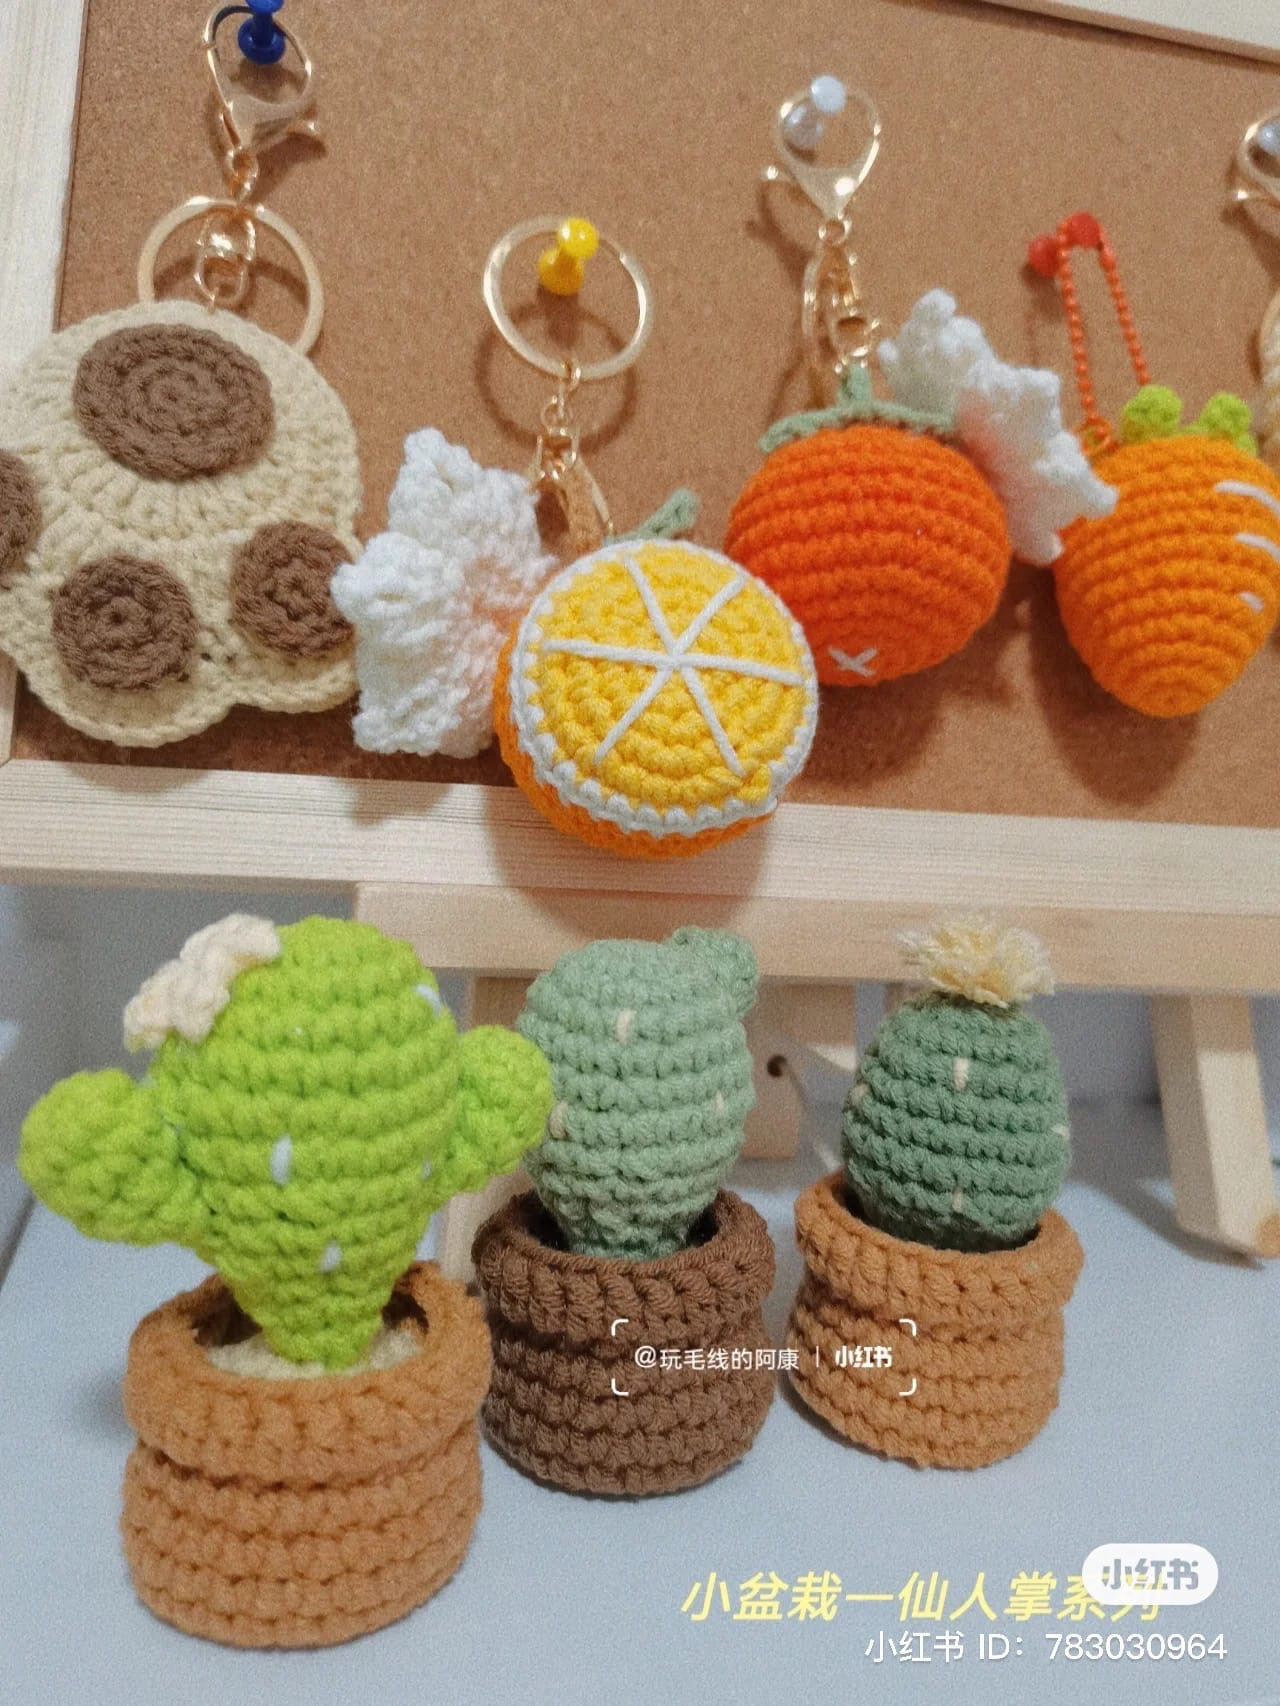 Sunflower and cactus crochet pattern.